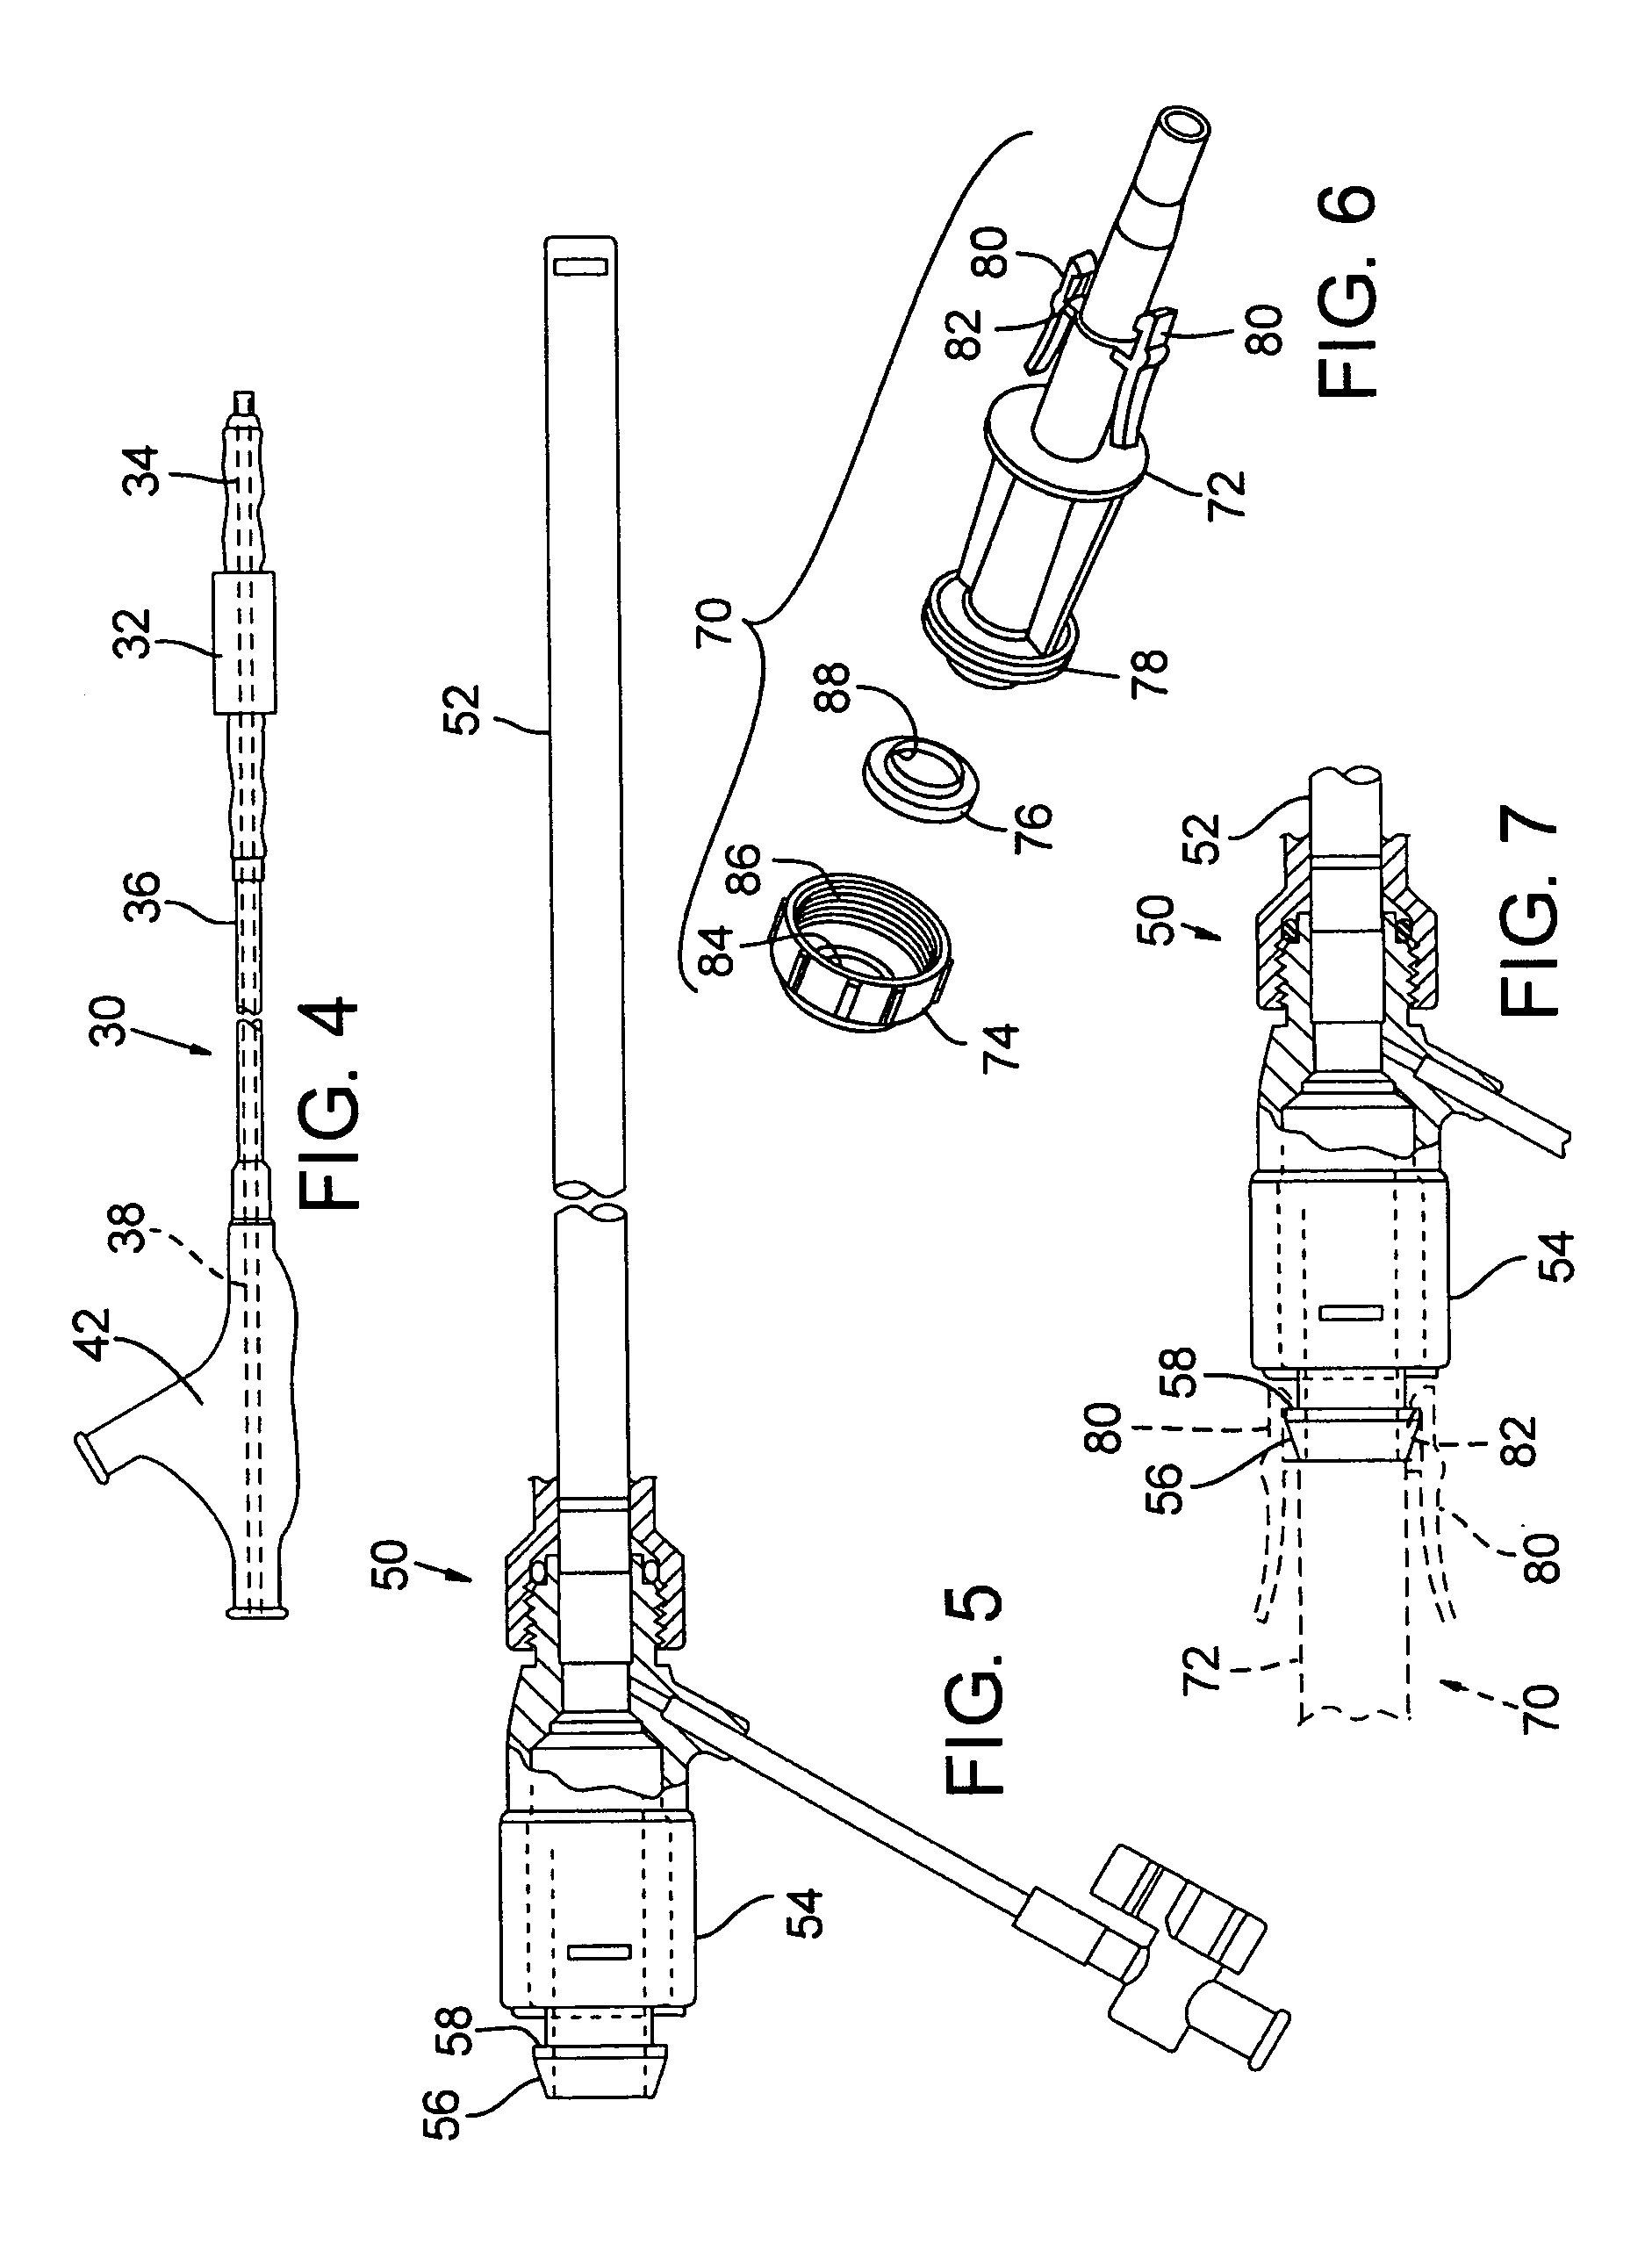 System for percutaneous delivery and removal of a prosthetic valve